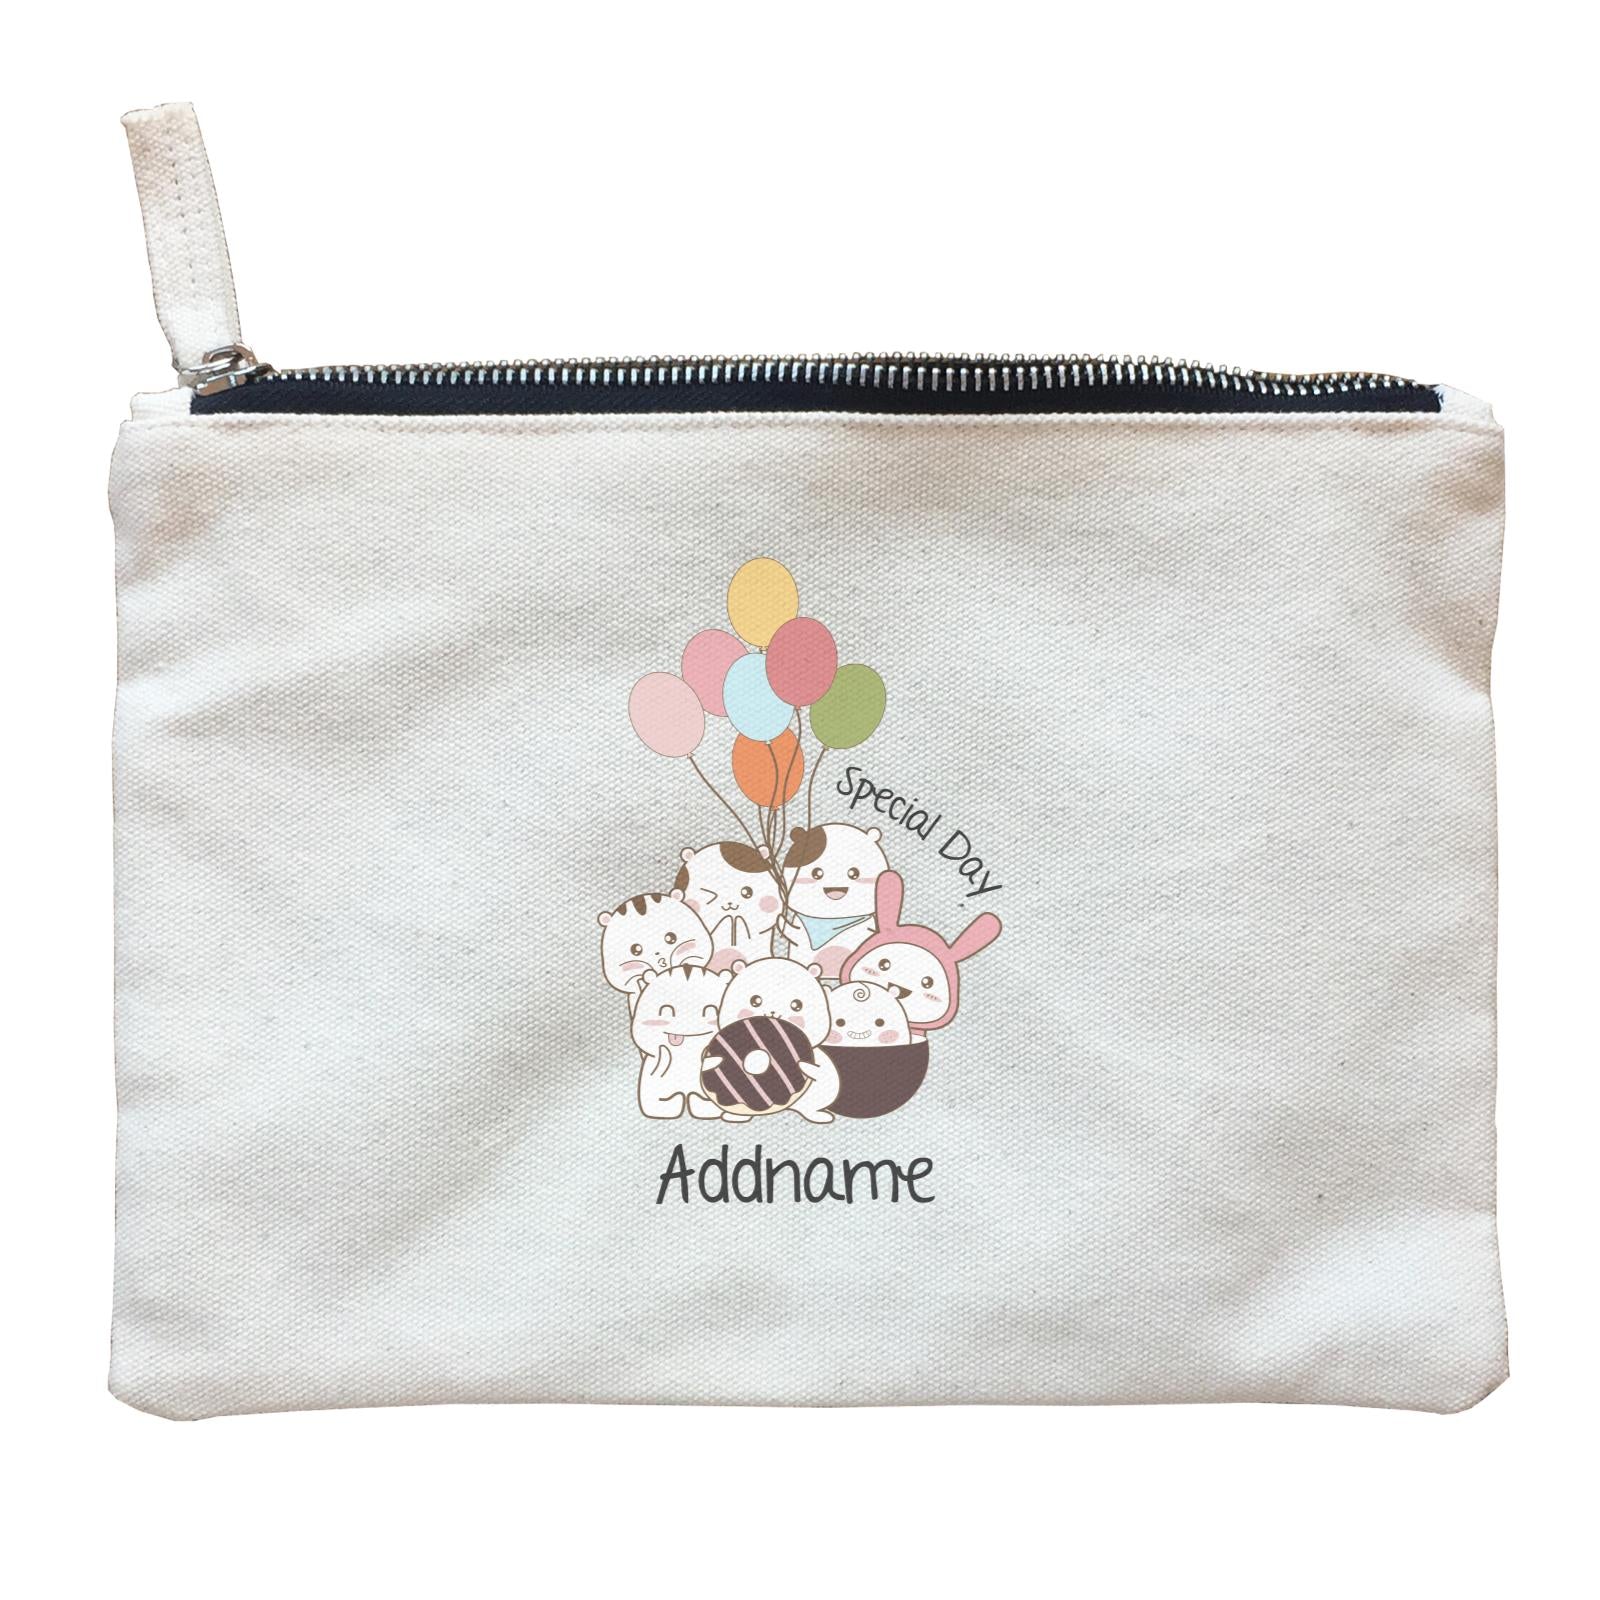 Cute Animals And Friends Series Cute Hamster Special Day Addname Zipper Pouch